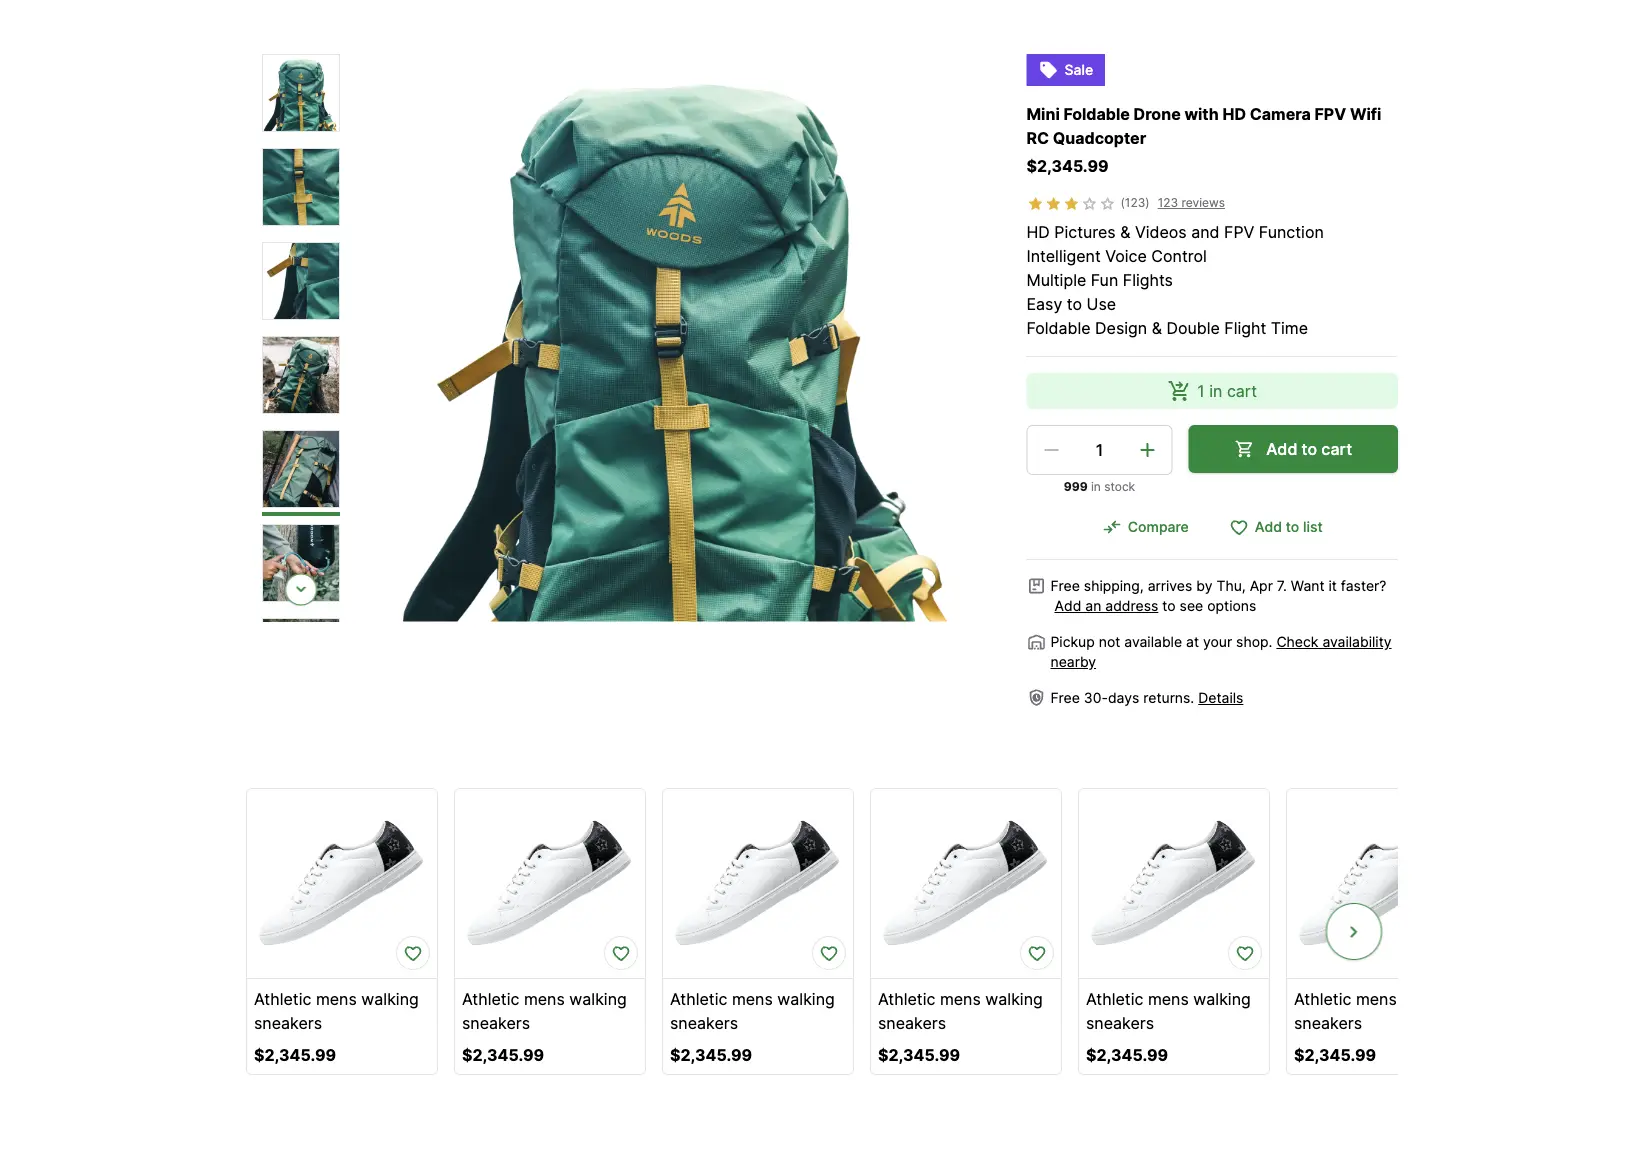 Product Details Page with Styles